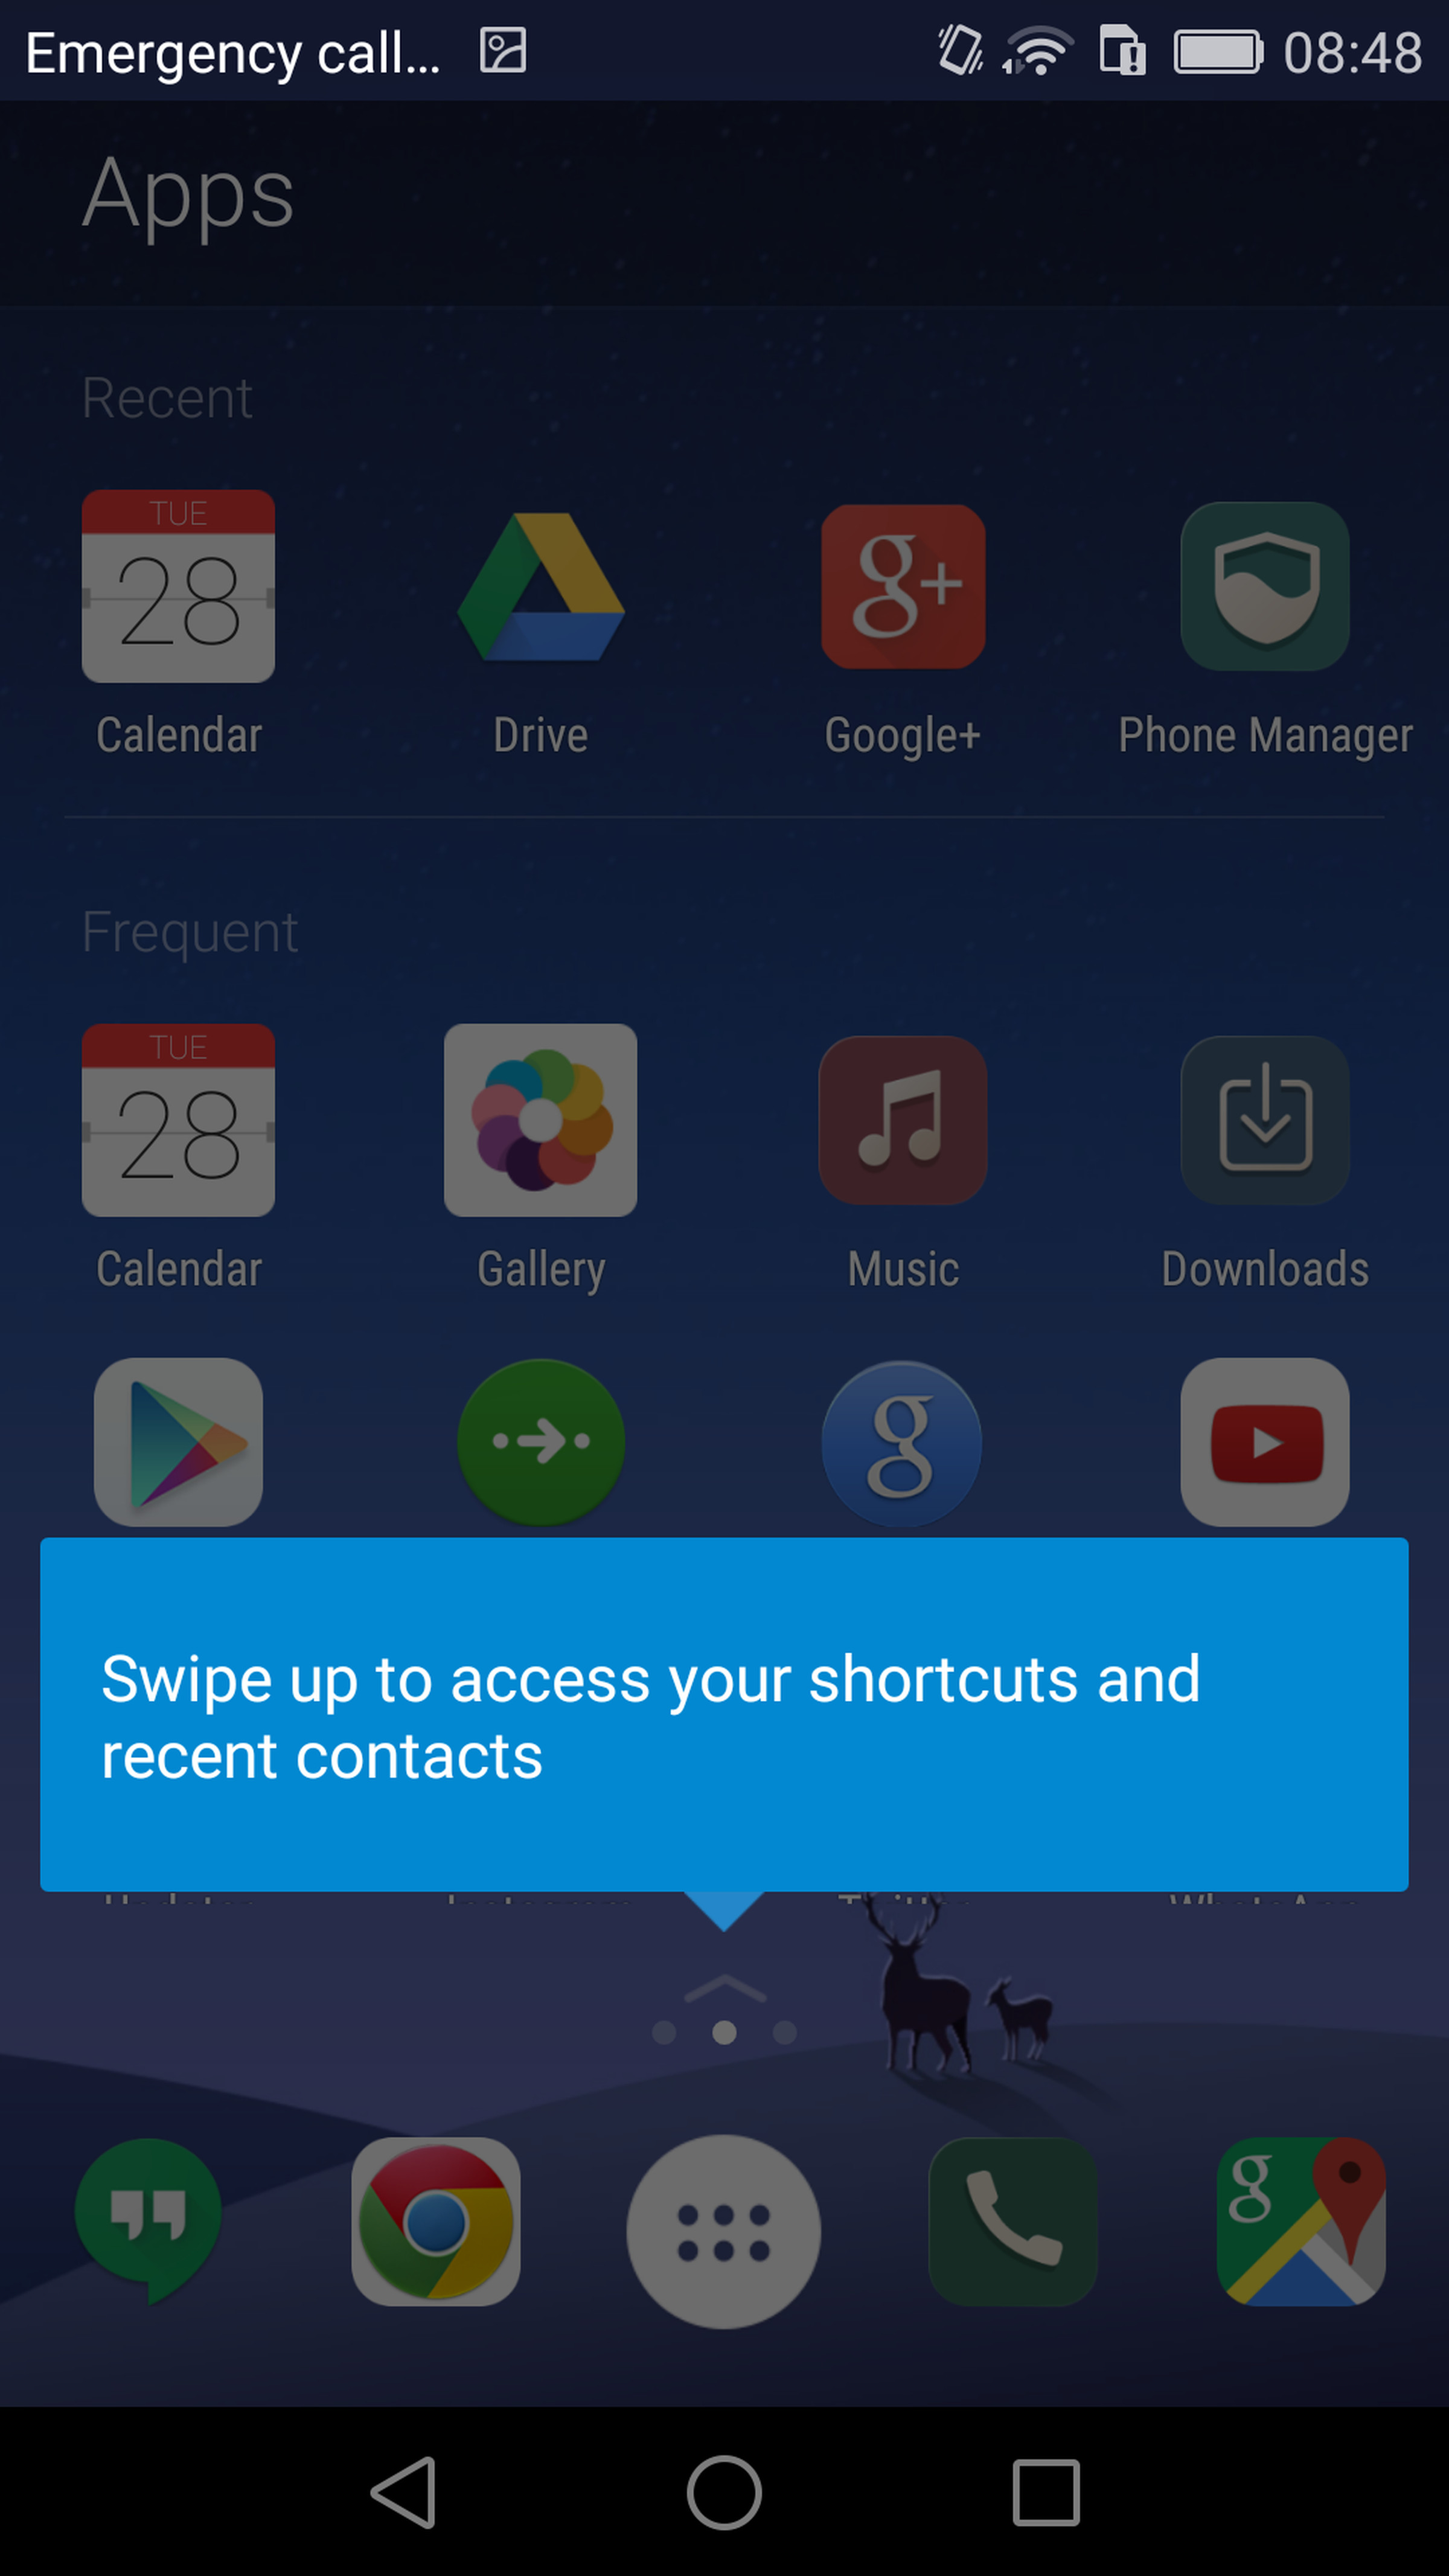 Microsoft's Arrow Android launcher 